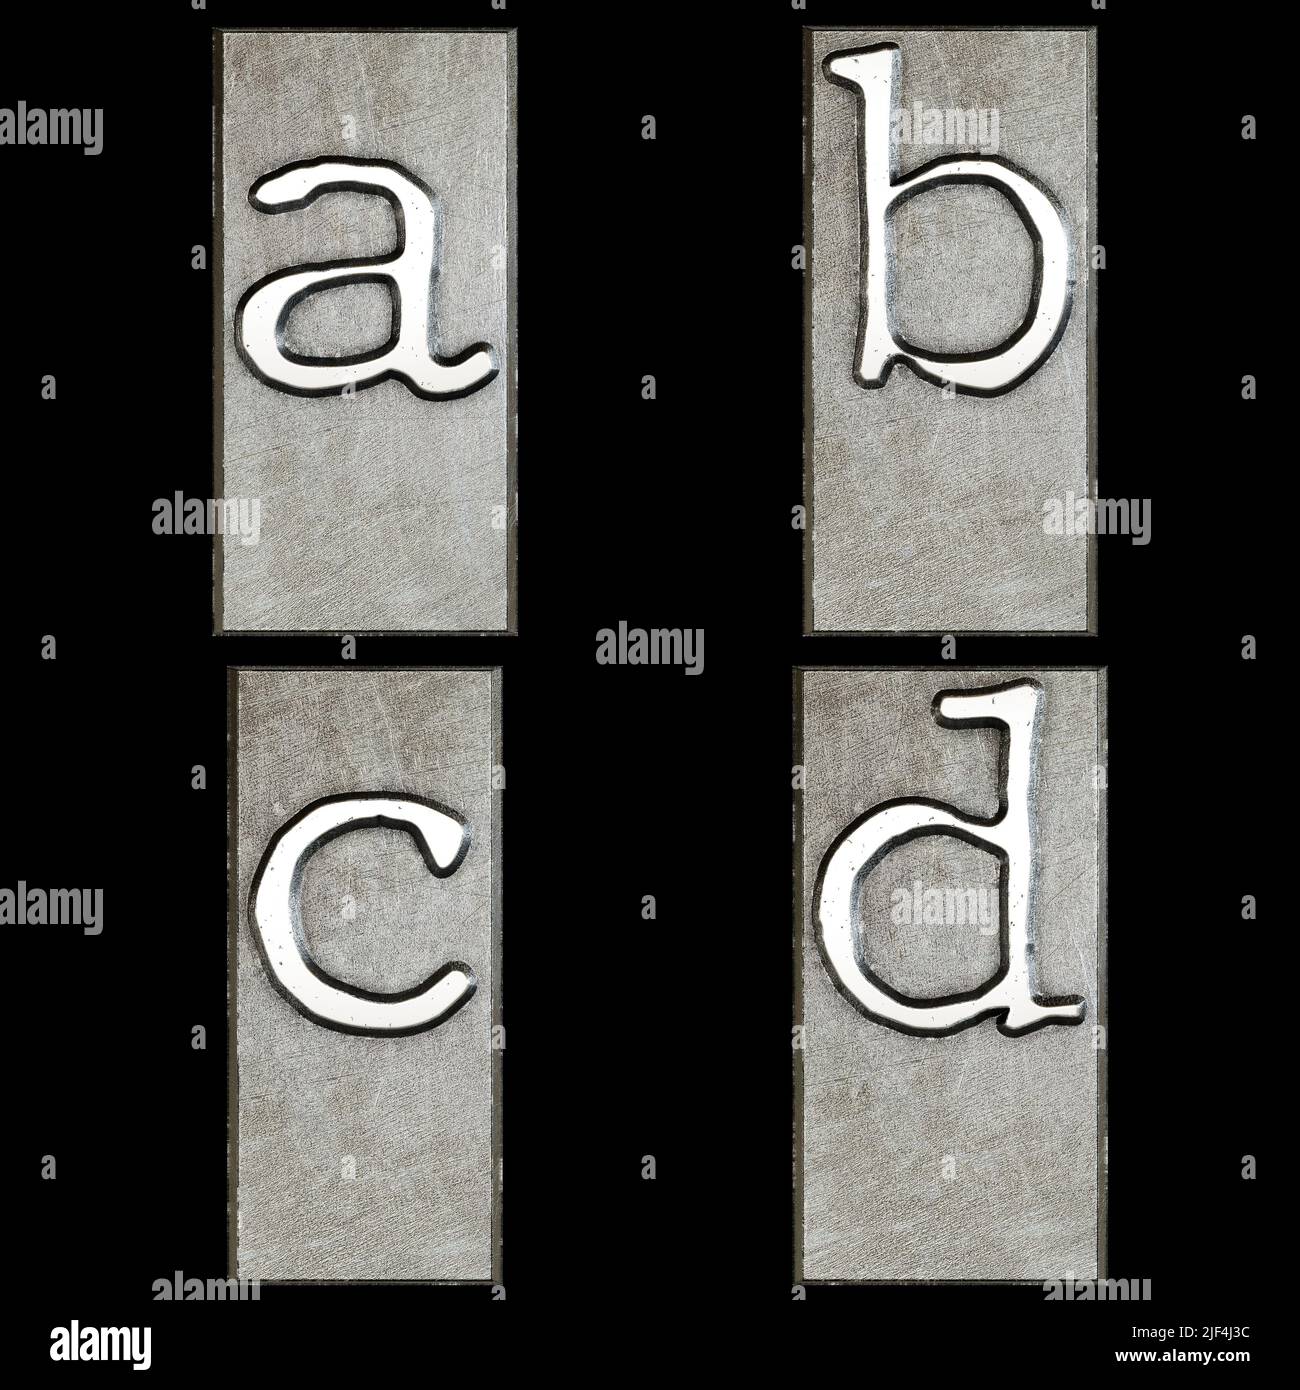 3D rendering of metal typewriter print head alphabet - lower case letters a-d Stock Photo